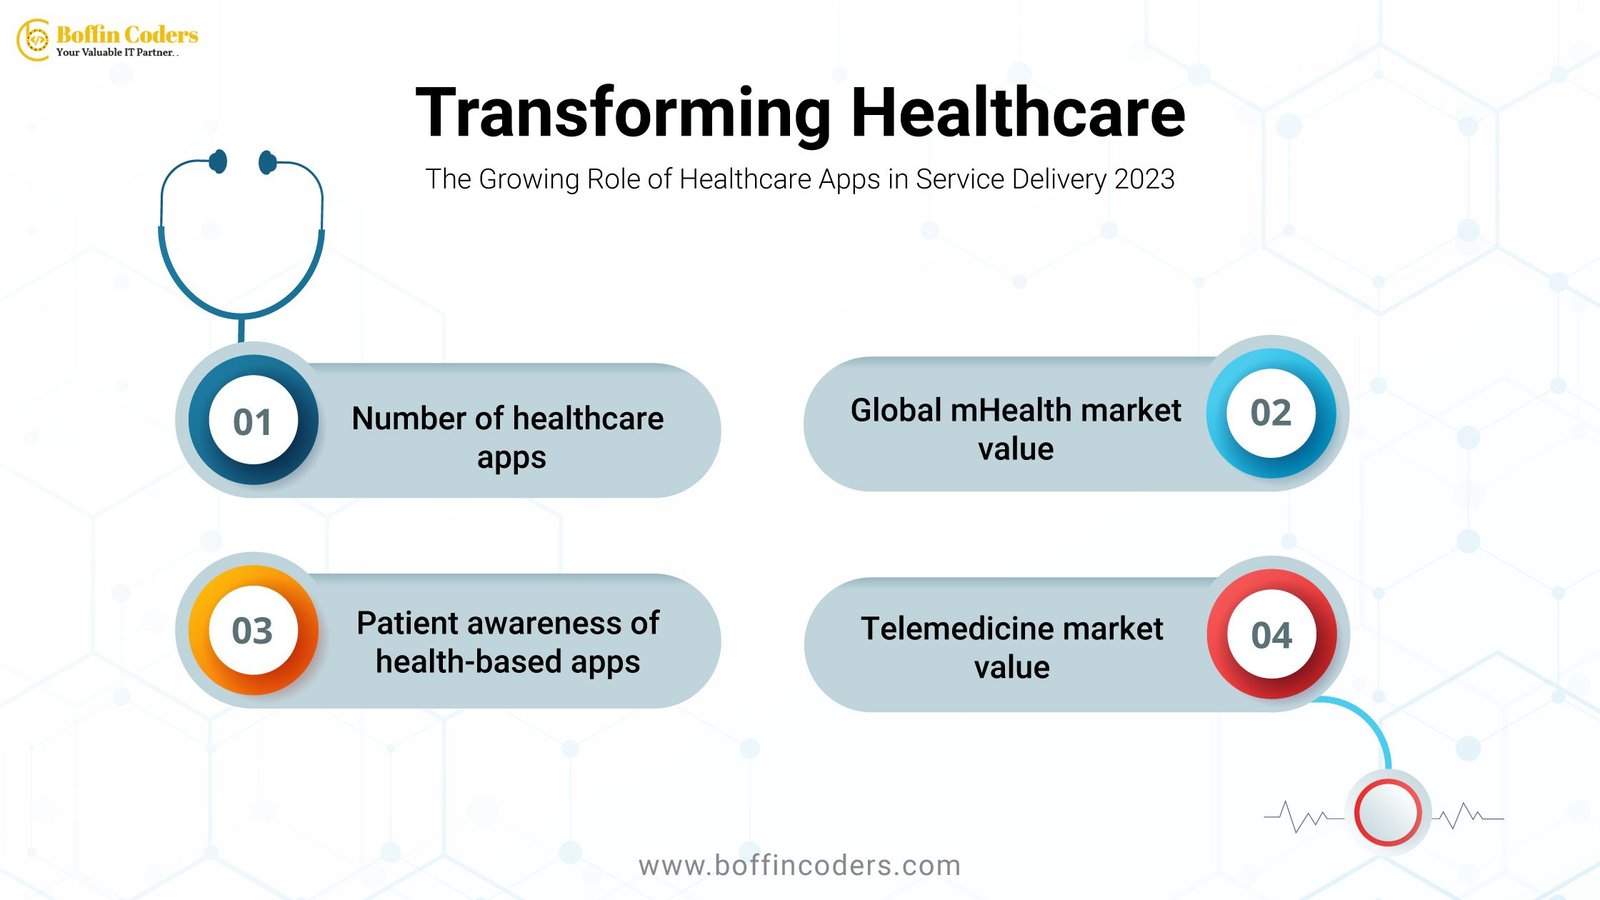 Transforming Healthcare: The Growing Role of Healthcare Apps in Service Delivery 2023